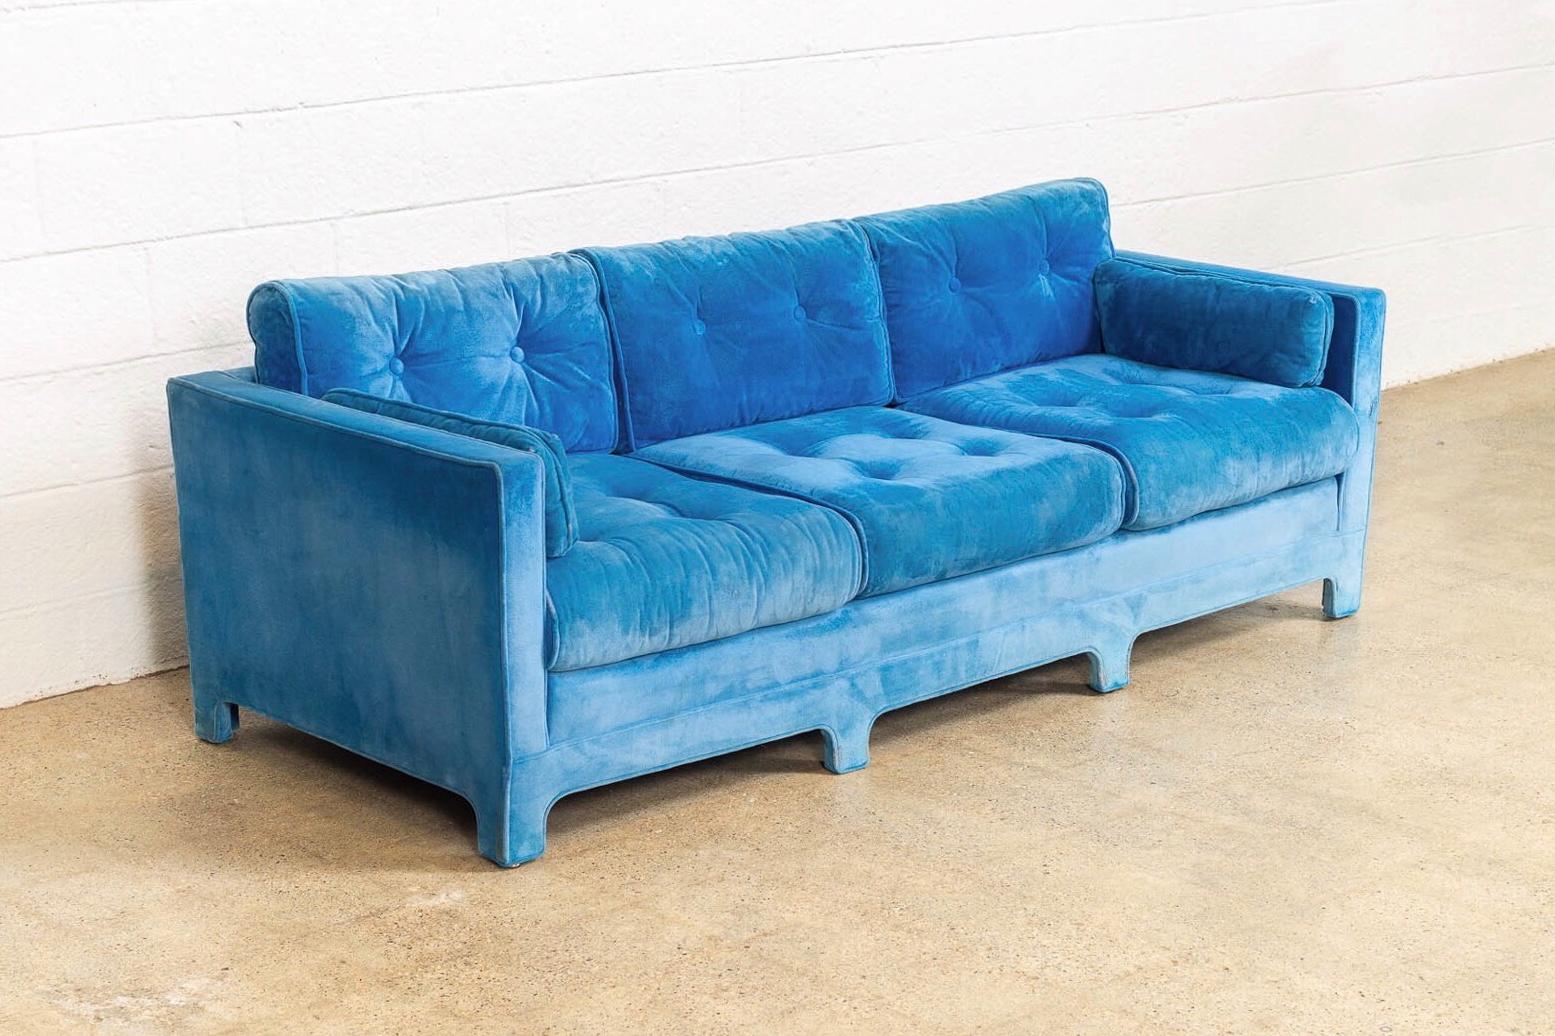 American Midcentury Blue Velvet Upholstered Three-Seat Sofa Couch, 1970s For Sale